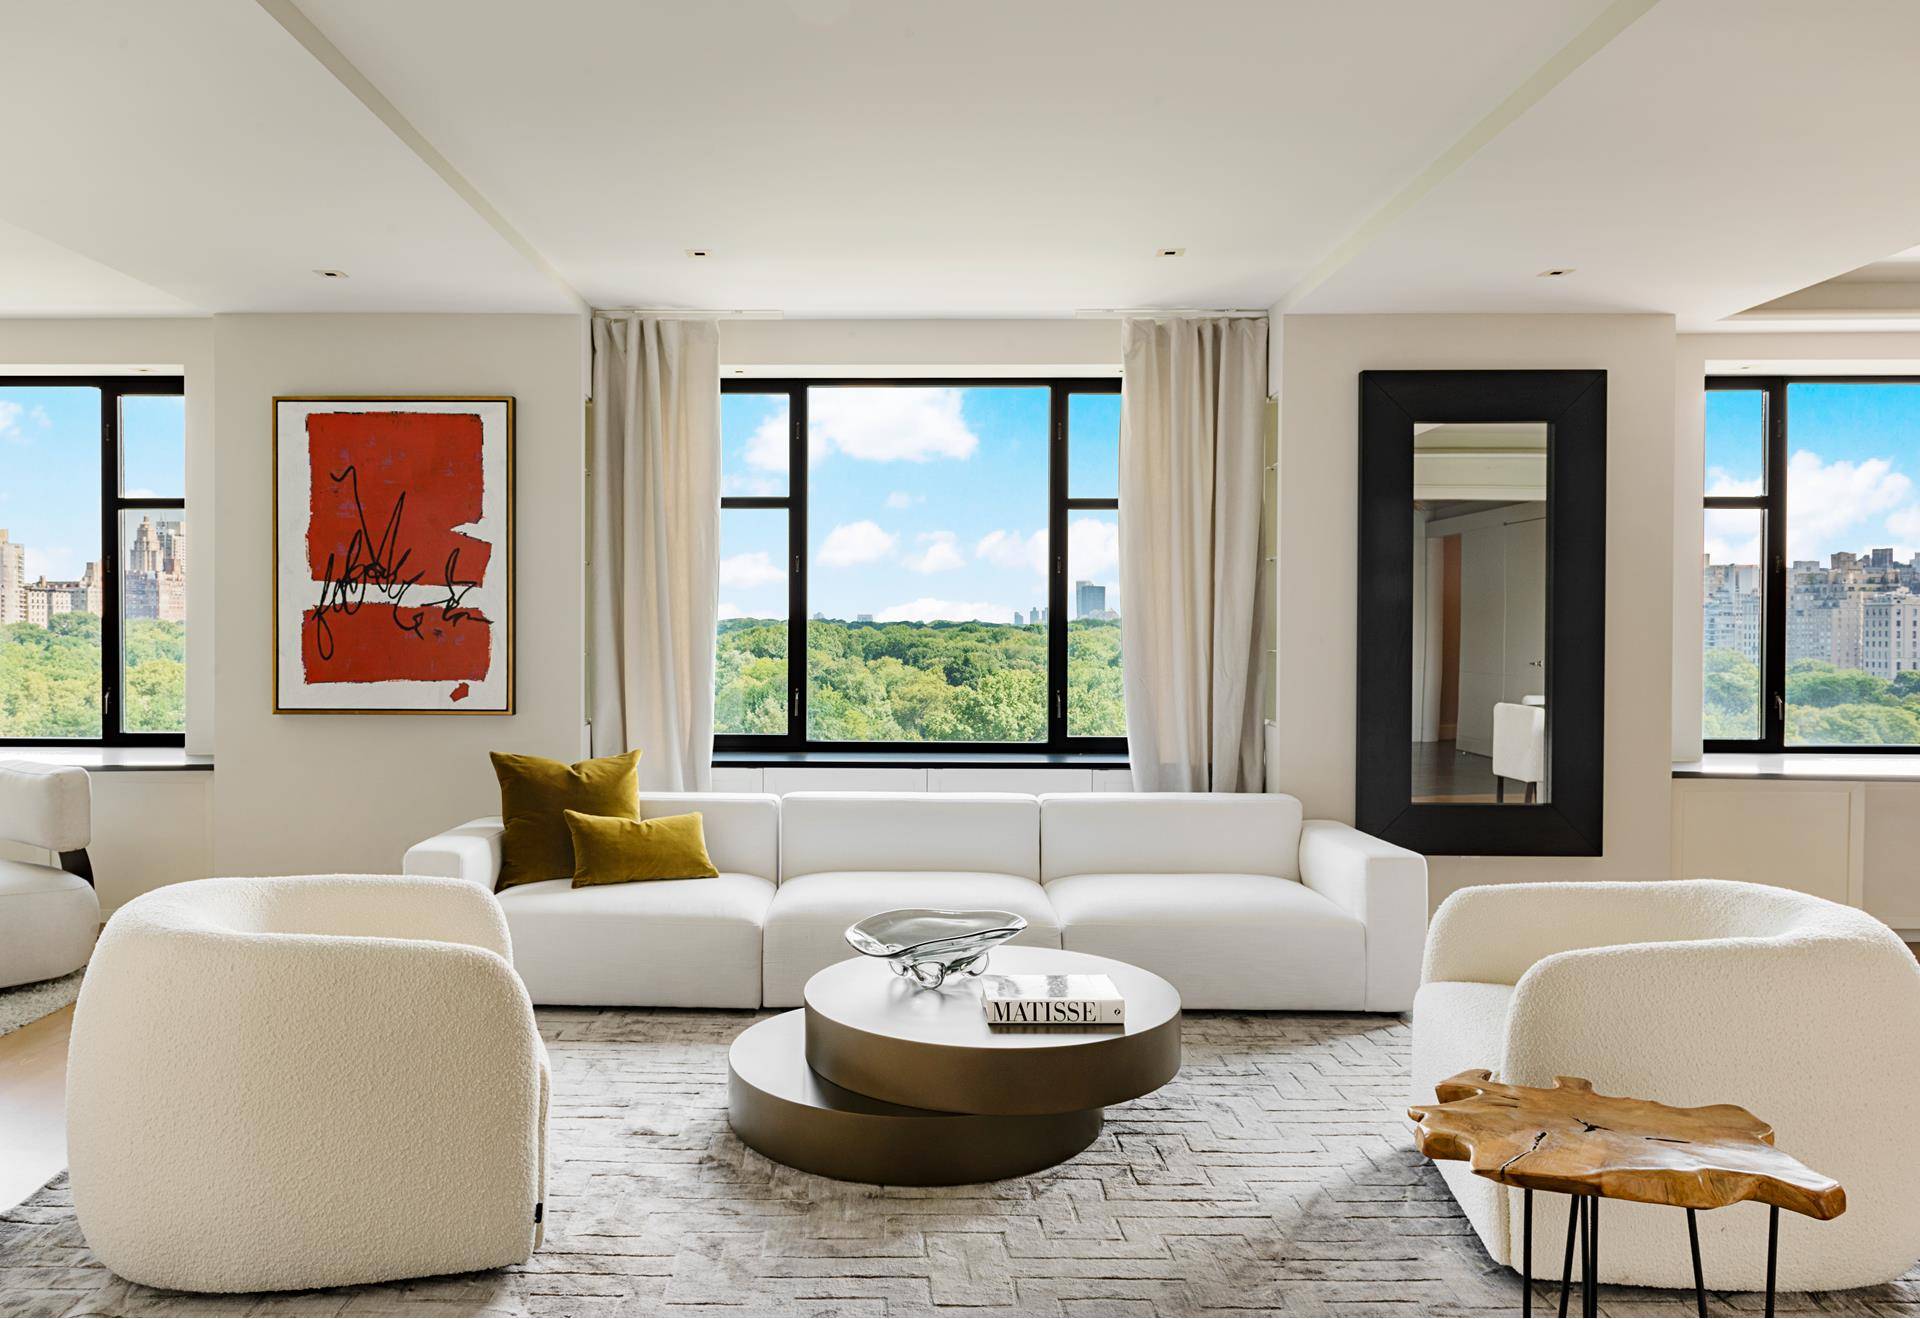 Spectacular Central Park Views from this sprawling 5 bedroom, 5.